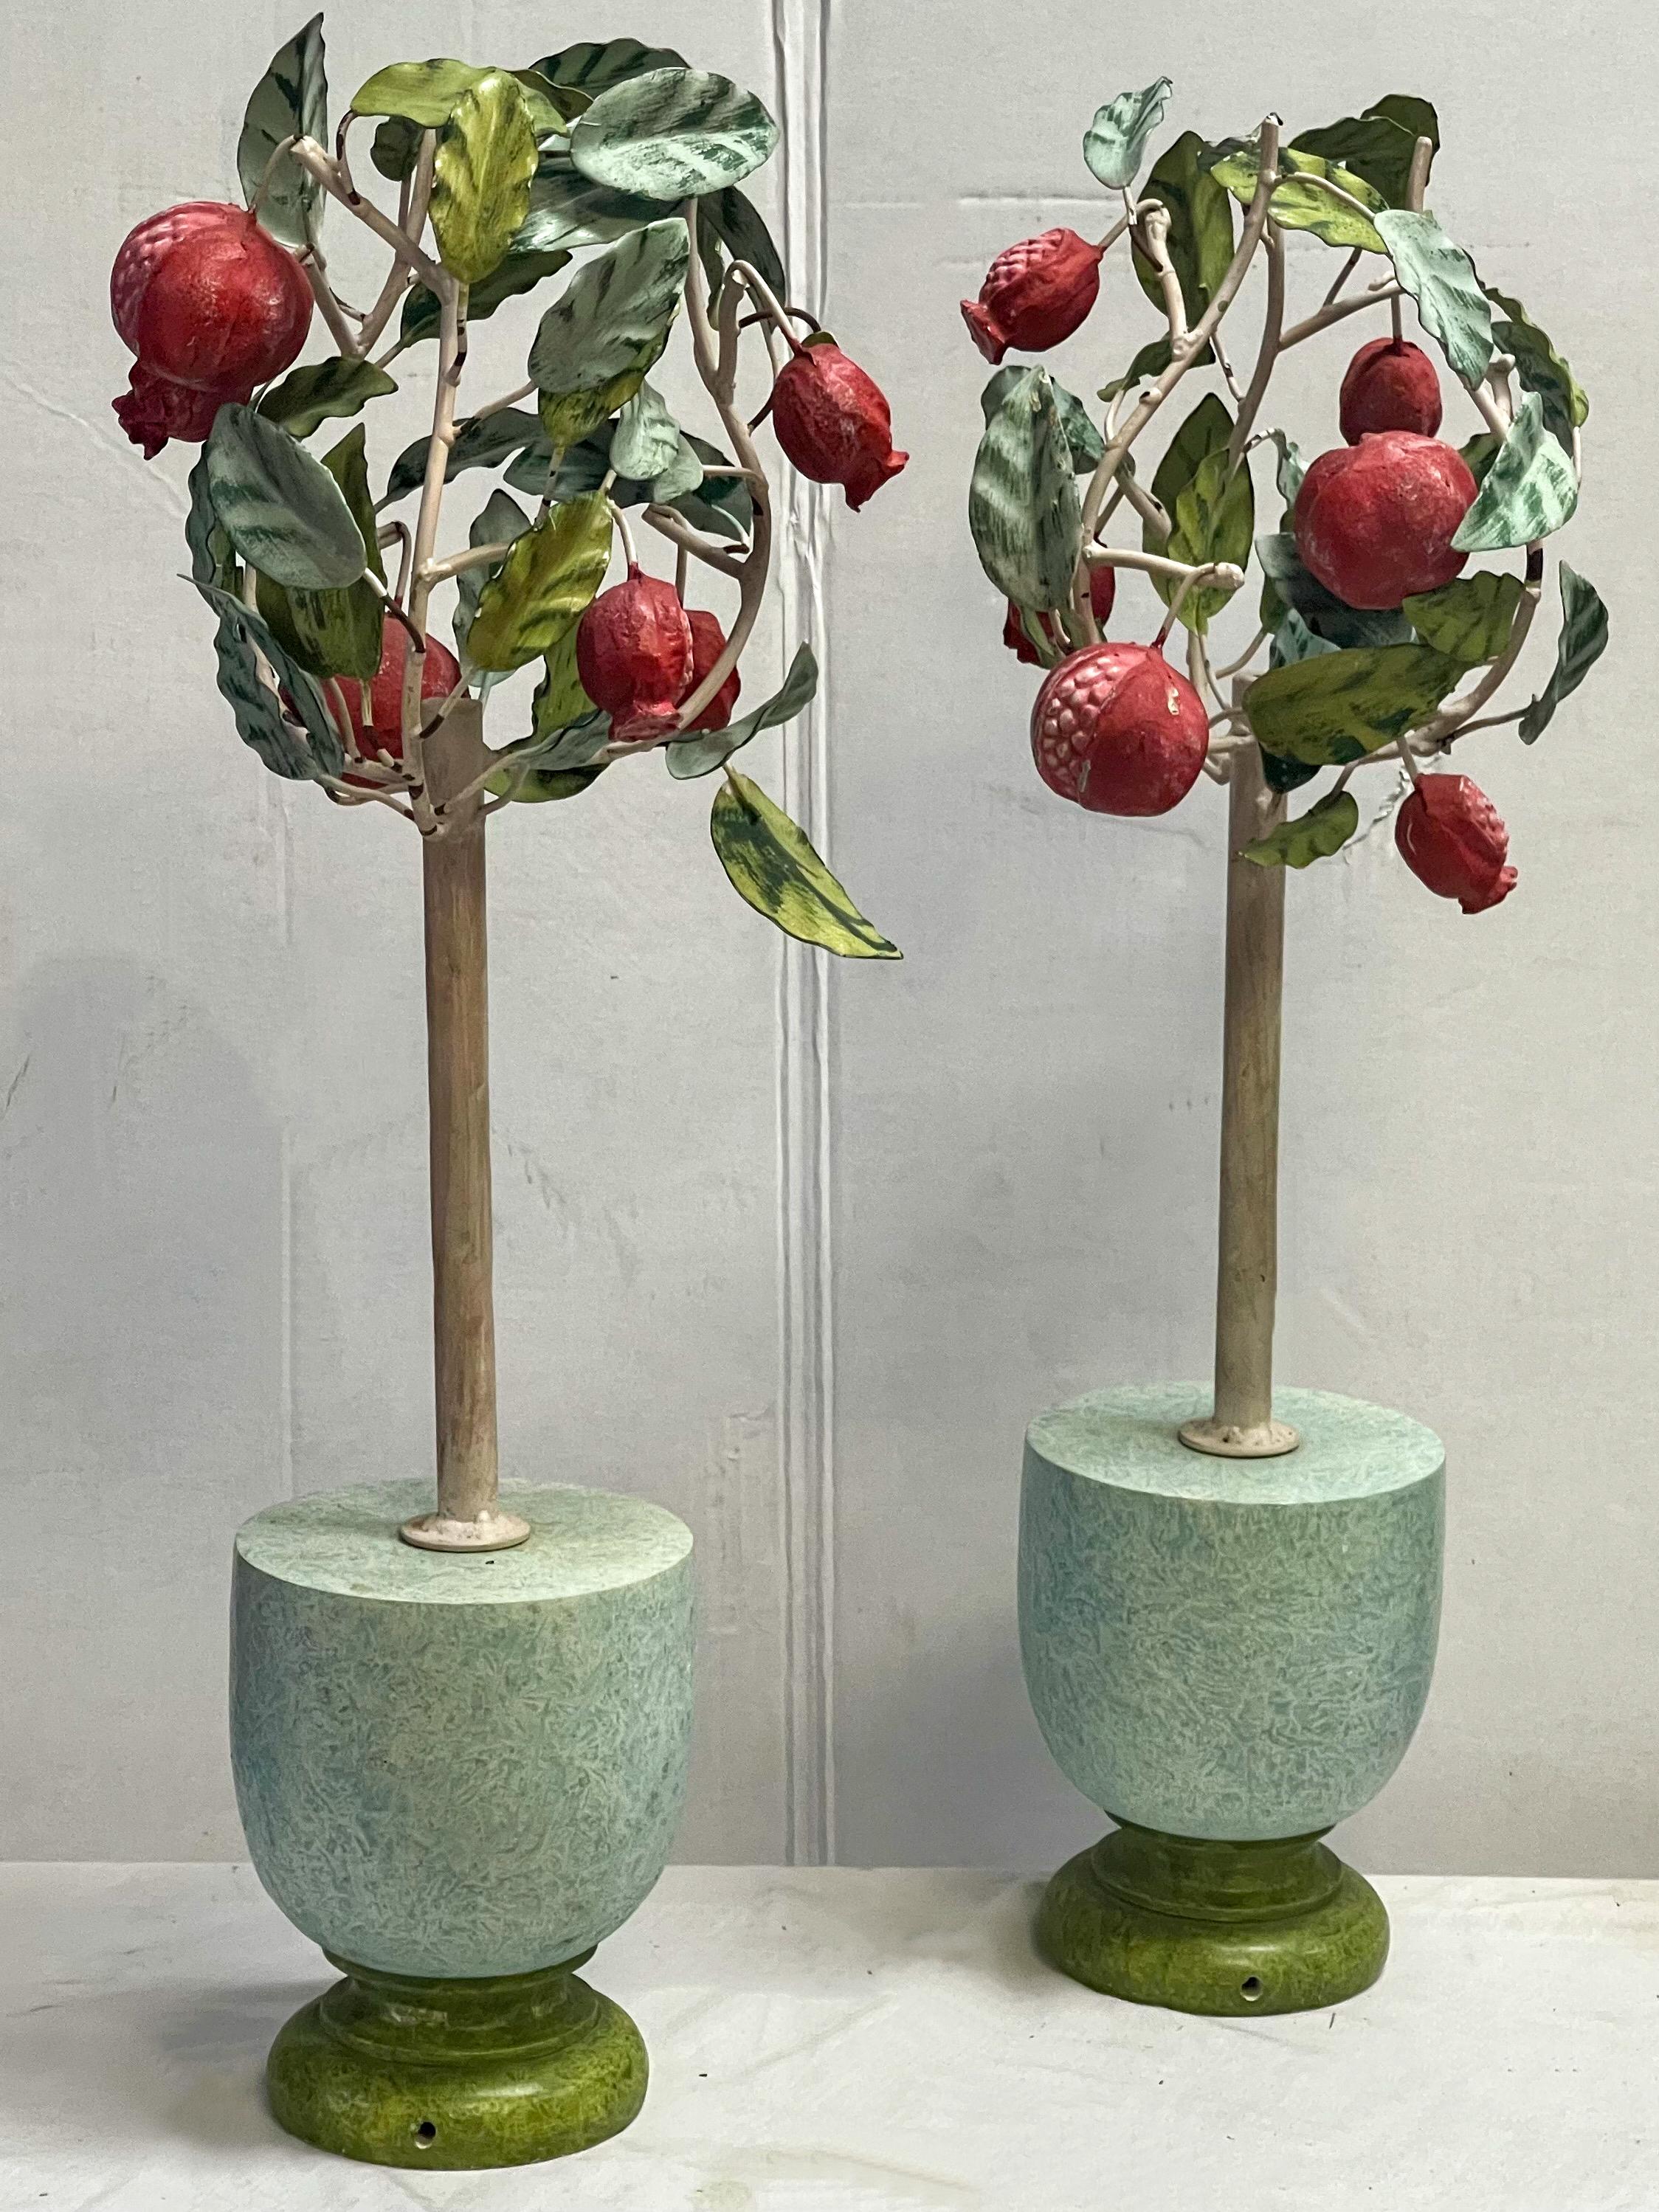 This is a lovely pair of Italian metal tole pomegranate topiaries in painted pots. The pots may have been a later addition. They are in good condition.